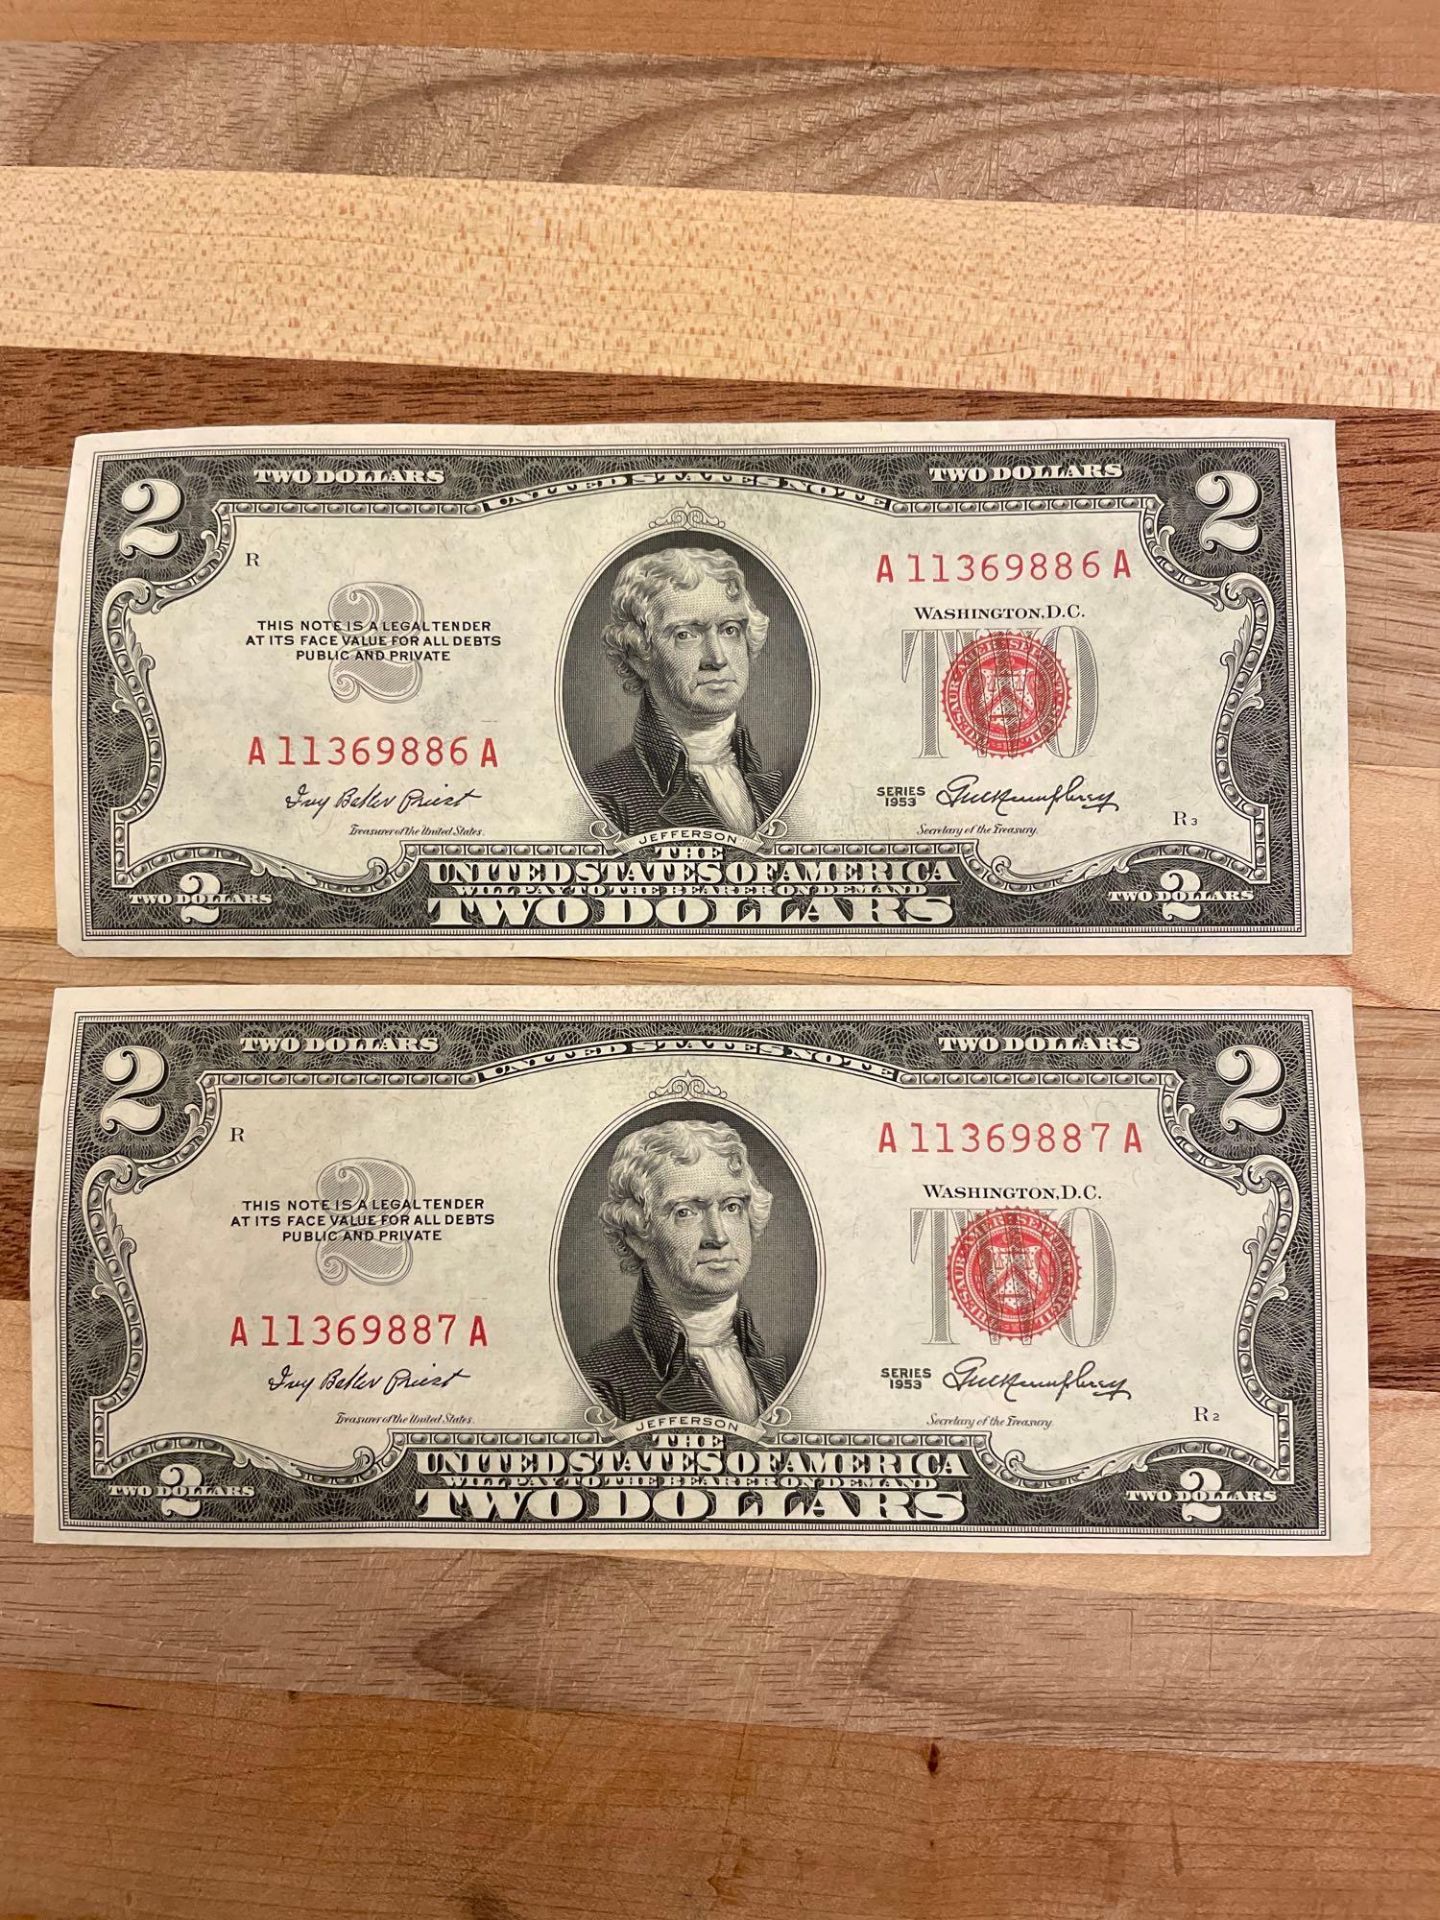 (2) 1953 VF $2 Red seal notes